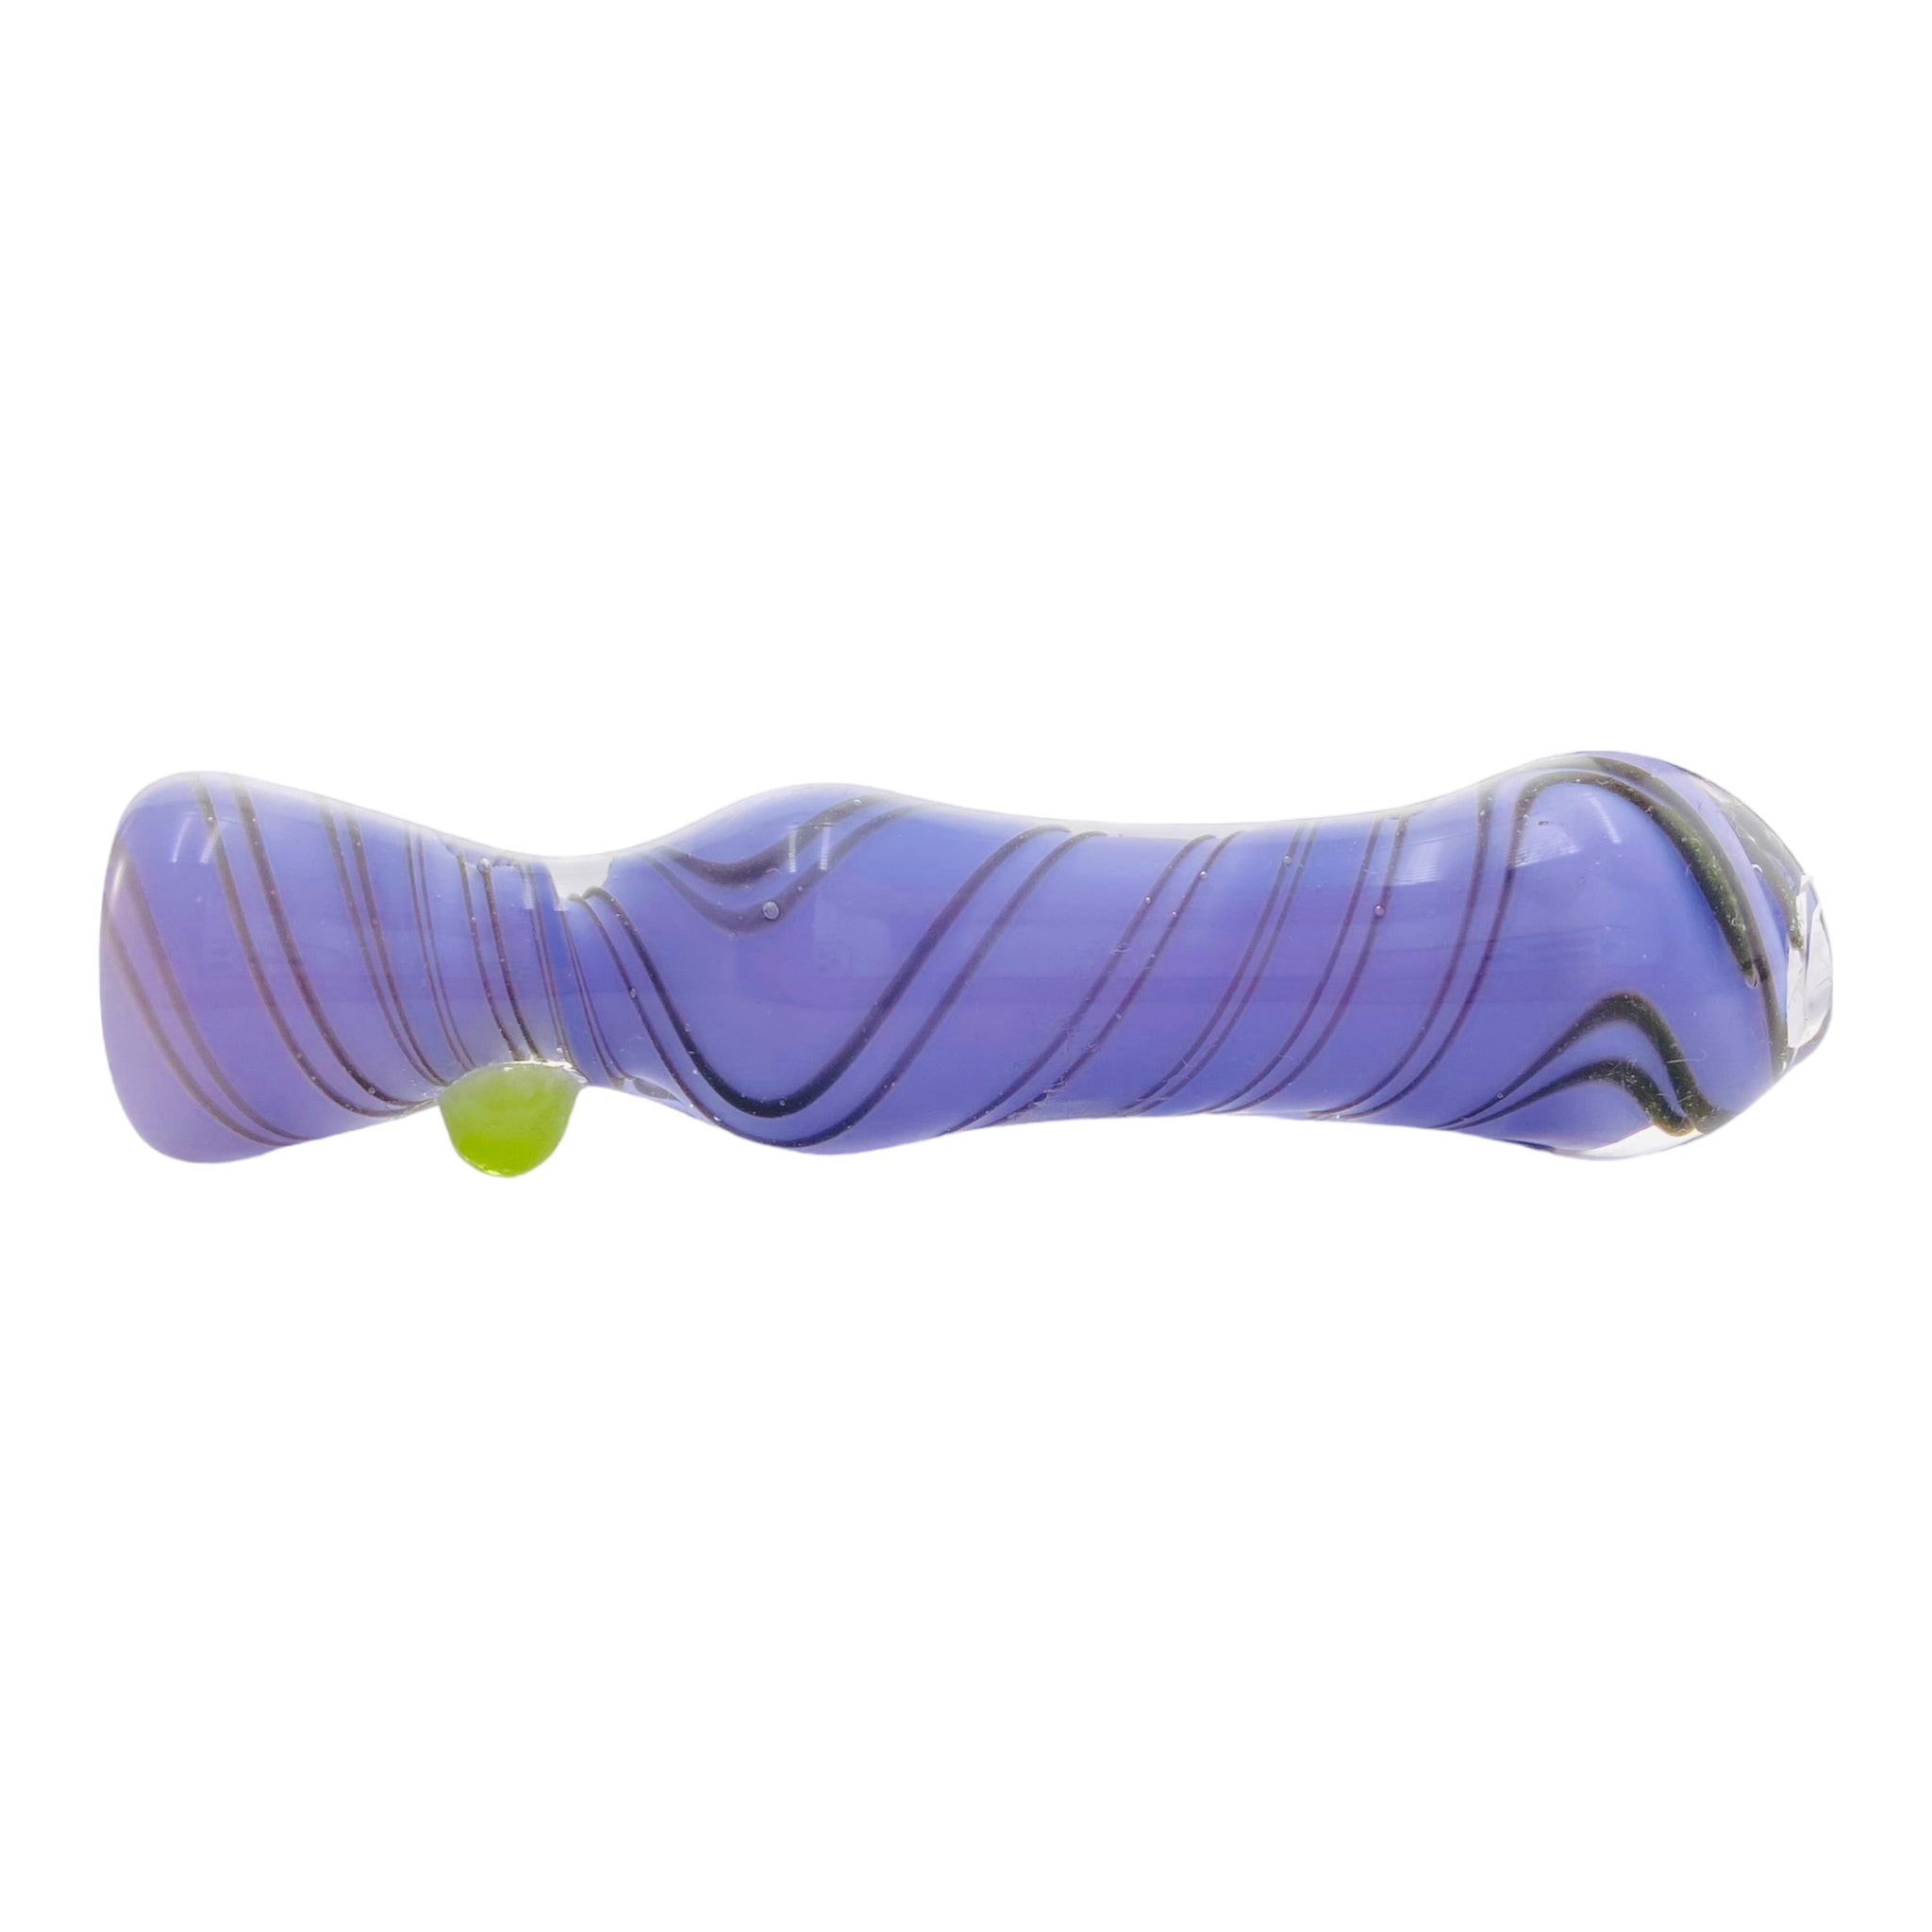 Glass Chillum Pipe - Purple With Black Spirals And Green Dot